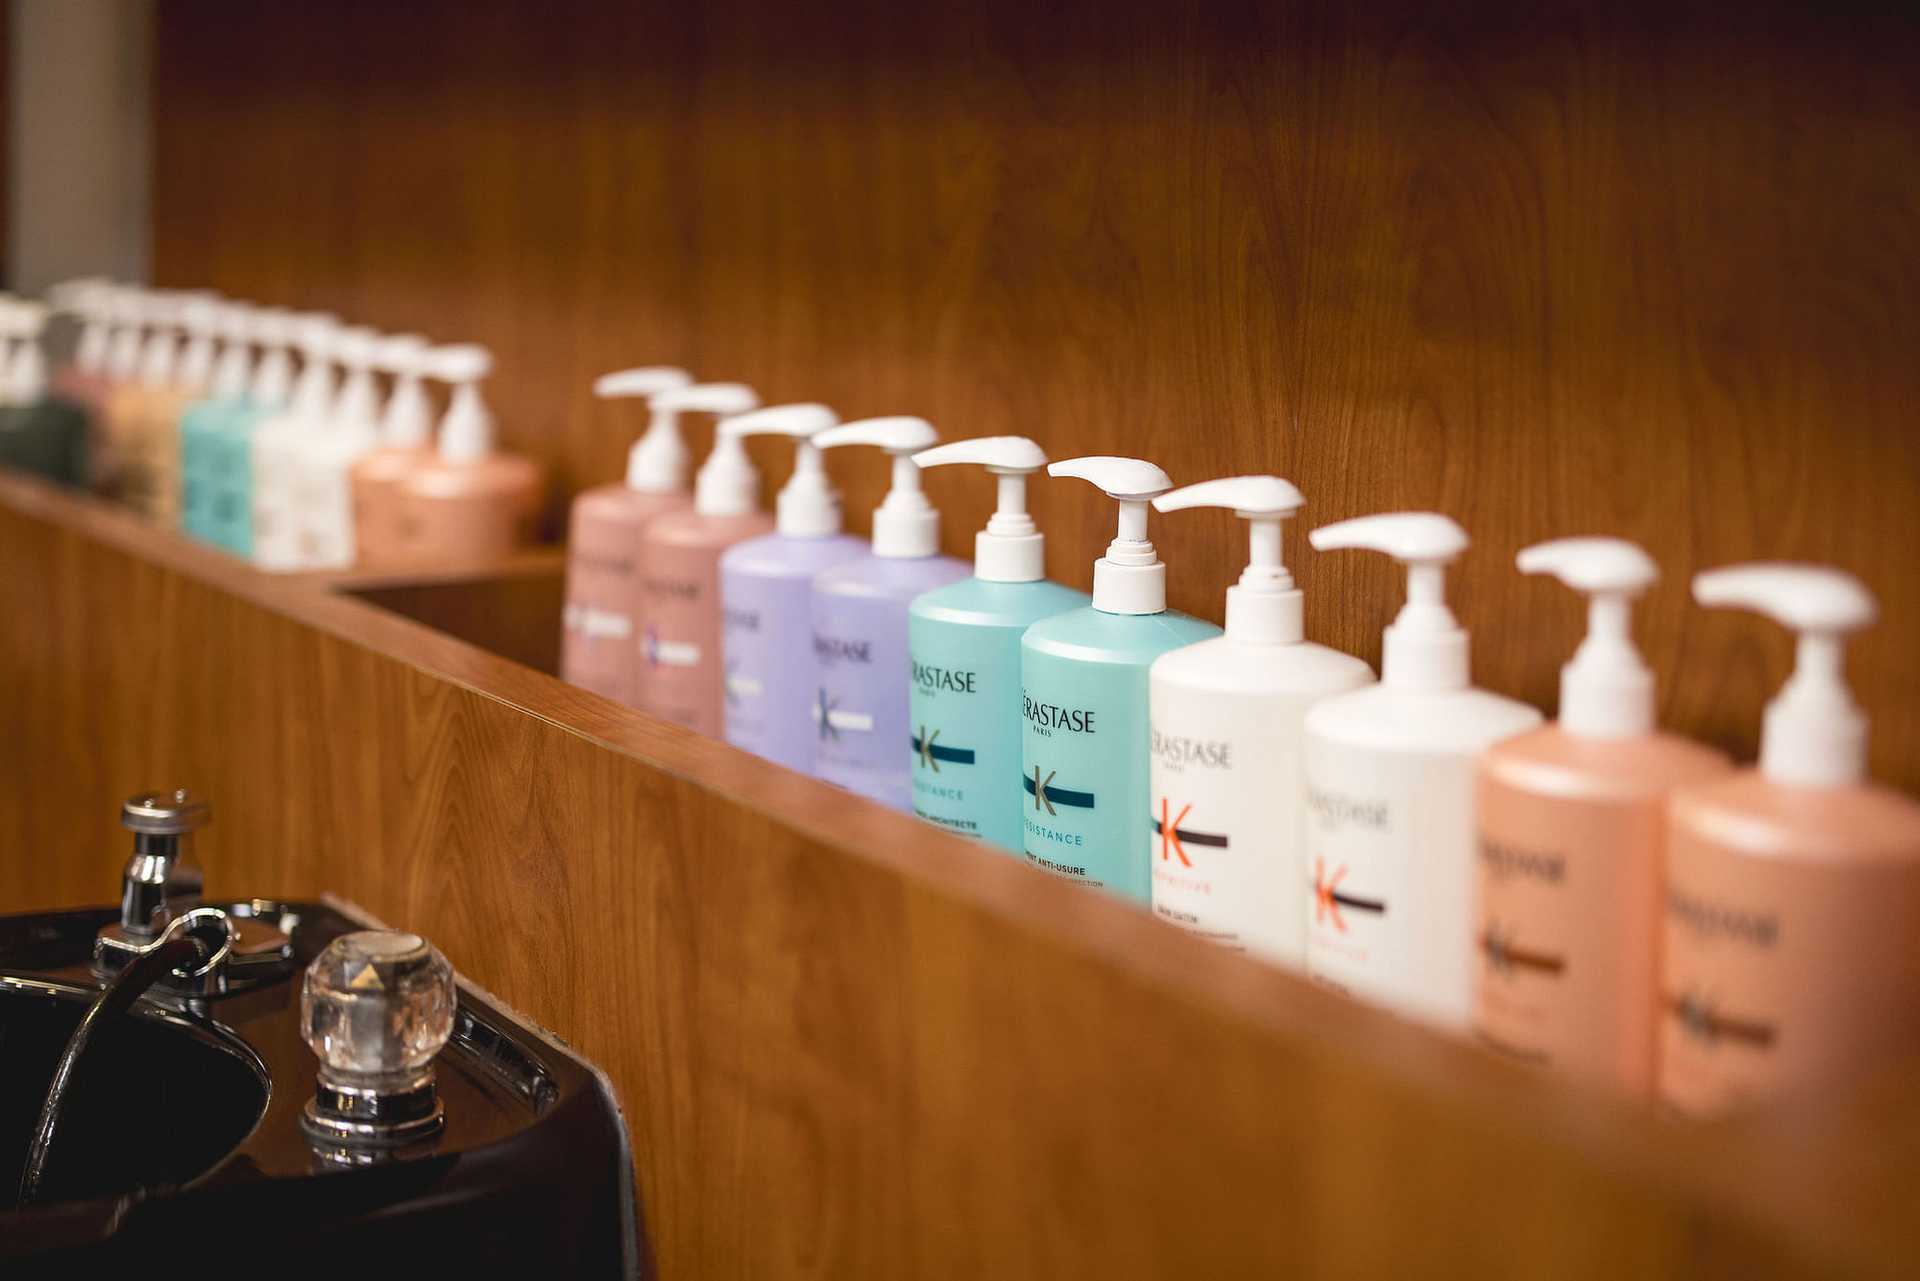 A row of various colorful shampoo and conditioner bottles lined up on a wooden shelf in a salon.